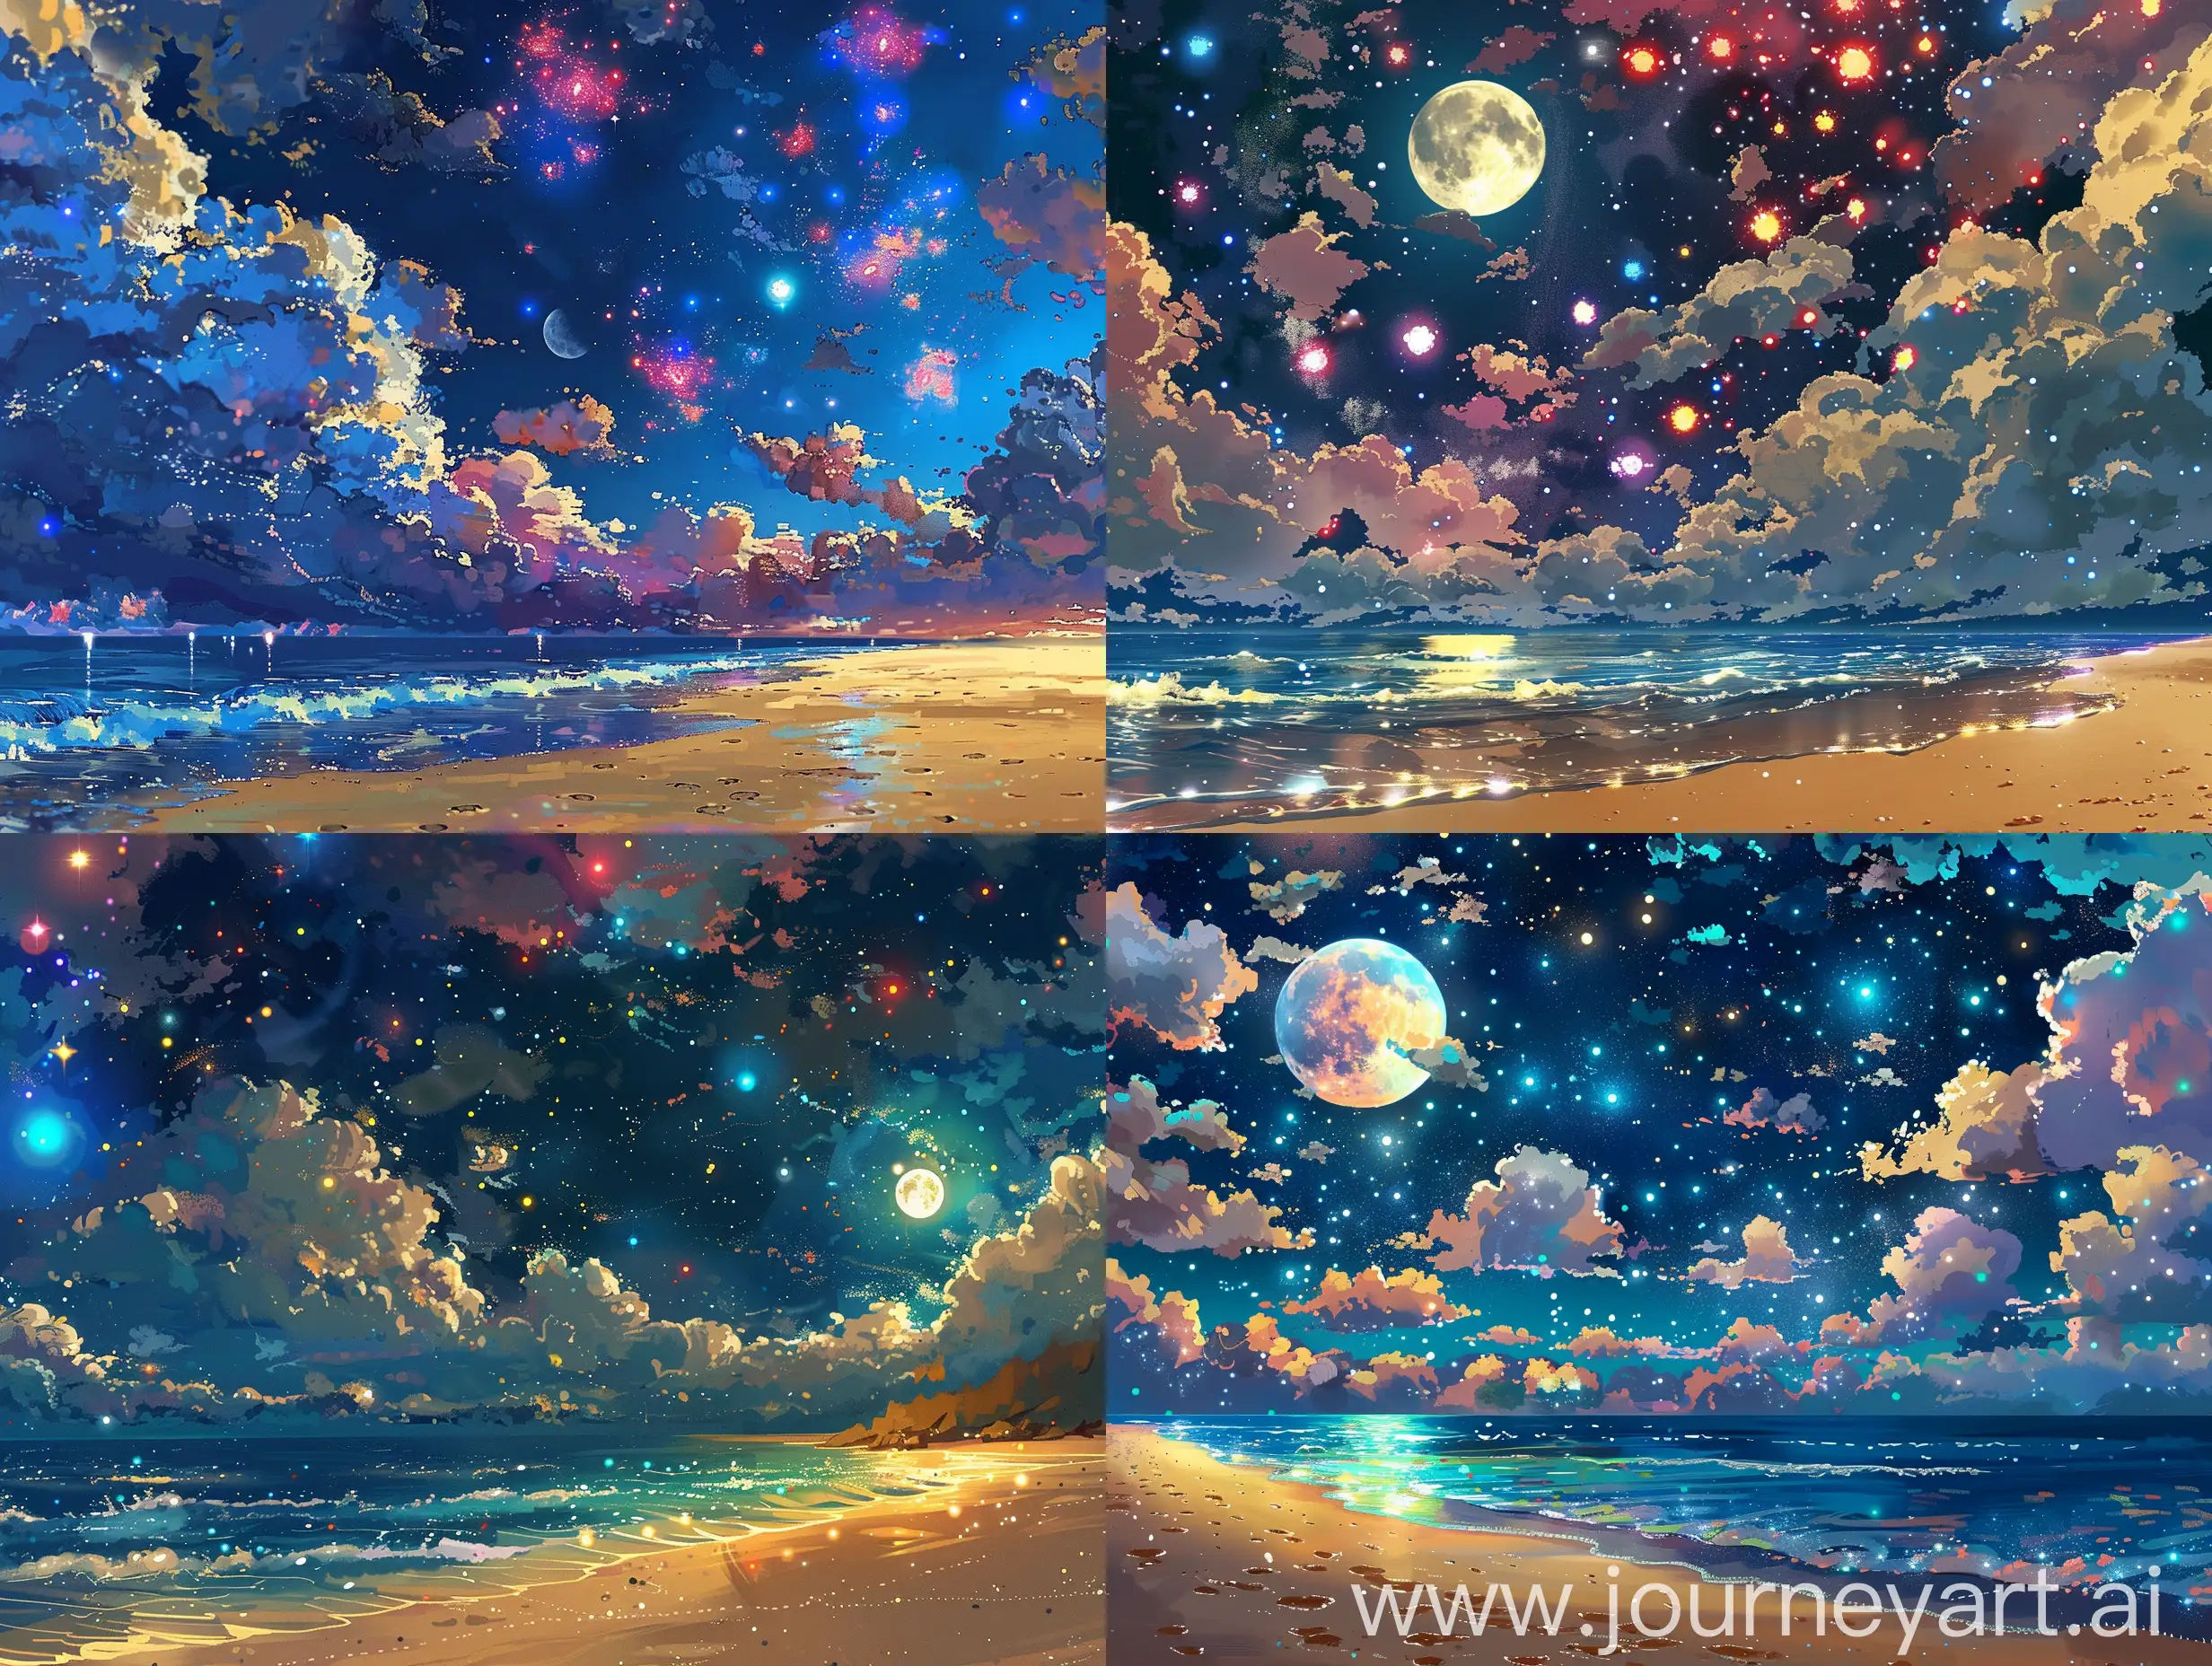 Perfect anime style, the night sky on the beach, where the nature of the earth blends with the imagination of the universe, many space clouds of different colors and glowing stars.The sand of the beach is golden, the lights of the full moon are reflected on it, the waves radiate their blue color.